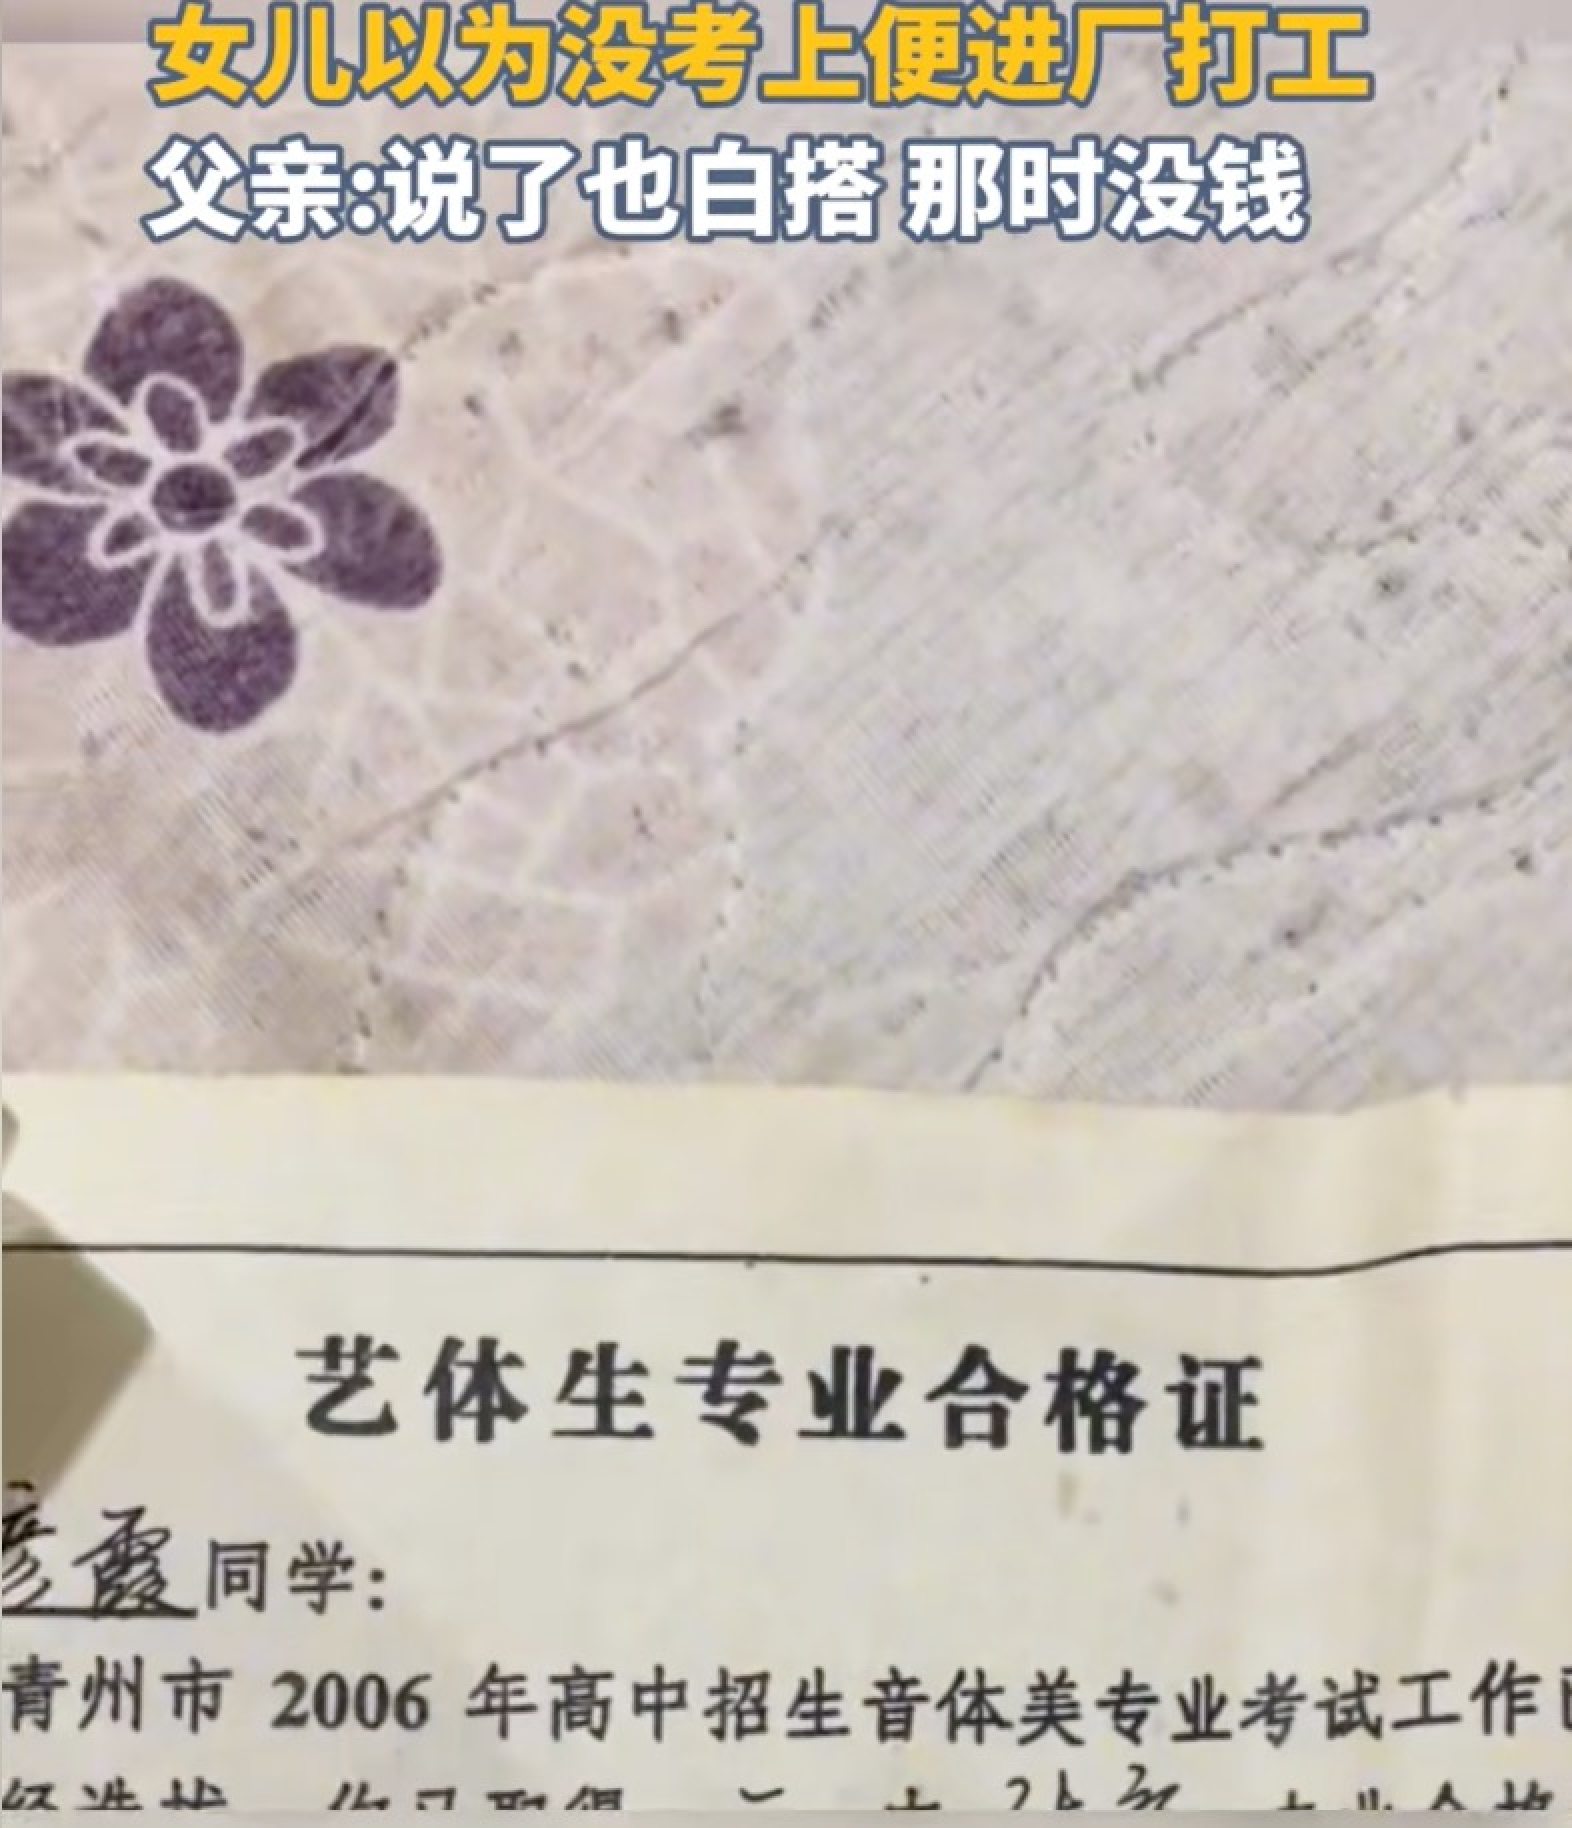 The woman accidentally found the letter 17 years after it arrived and was kept hidden from her. Photo: Douyin